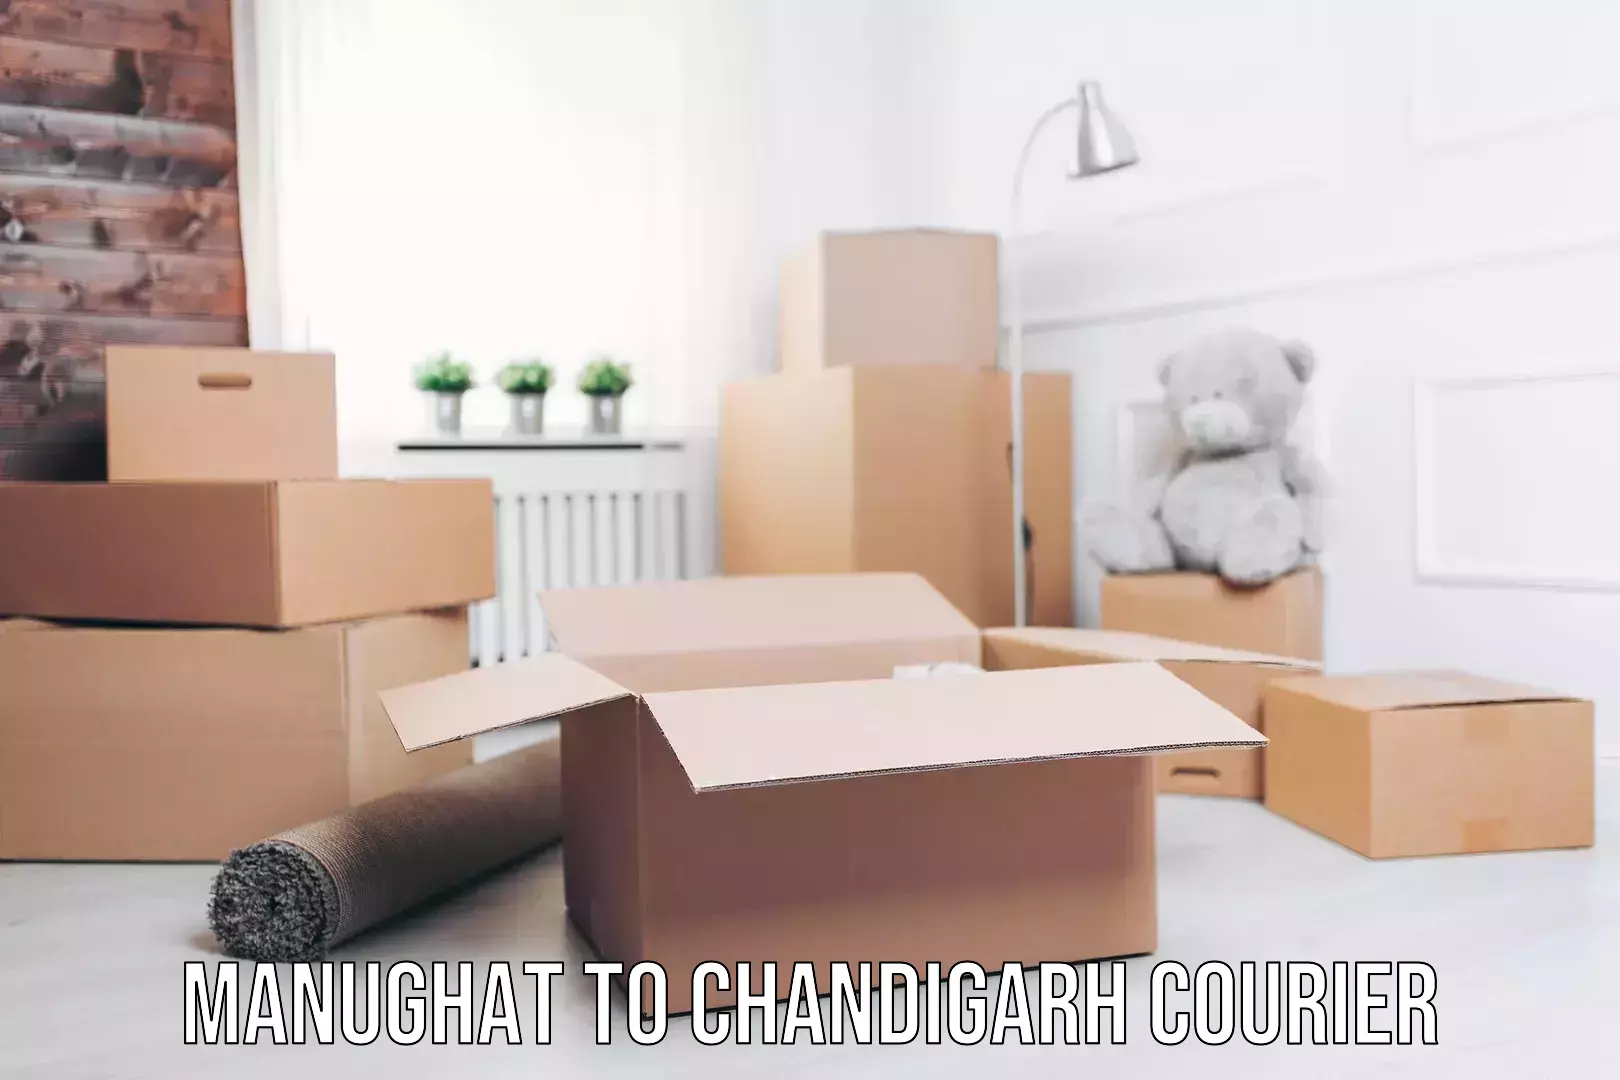 Sustainable shipping practices Manughat to Chandigarh